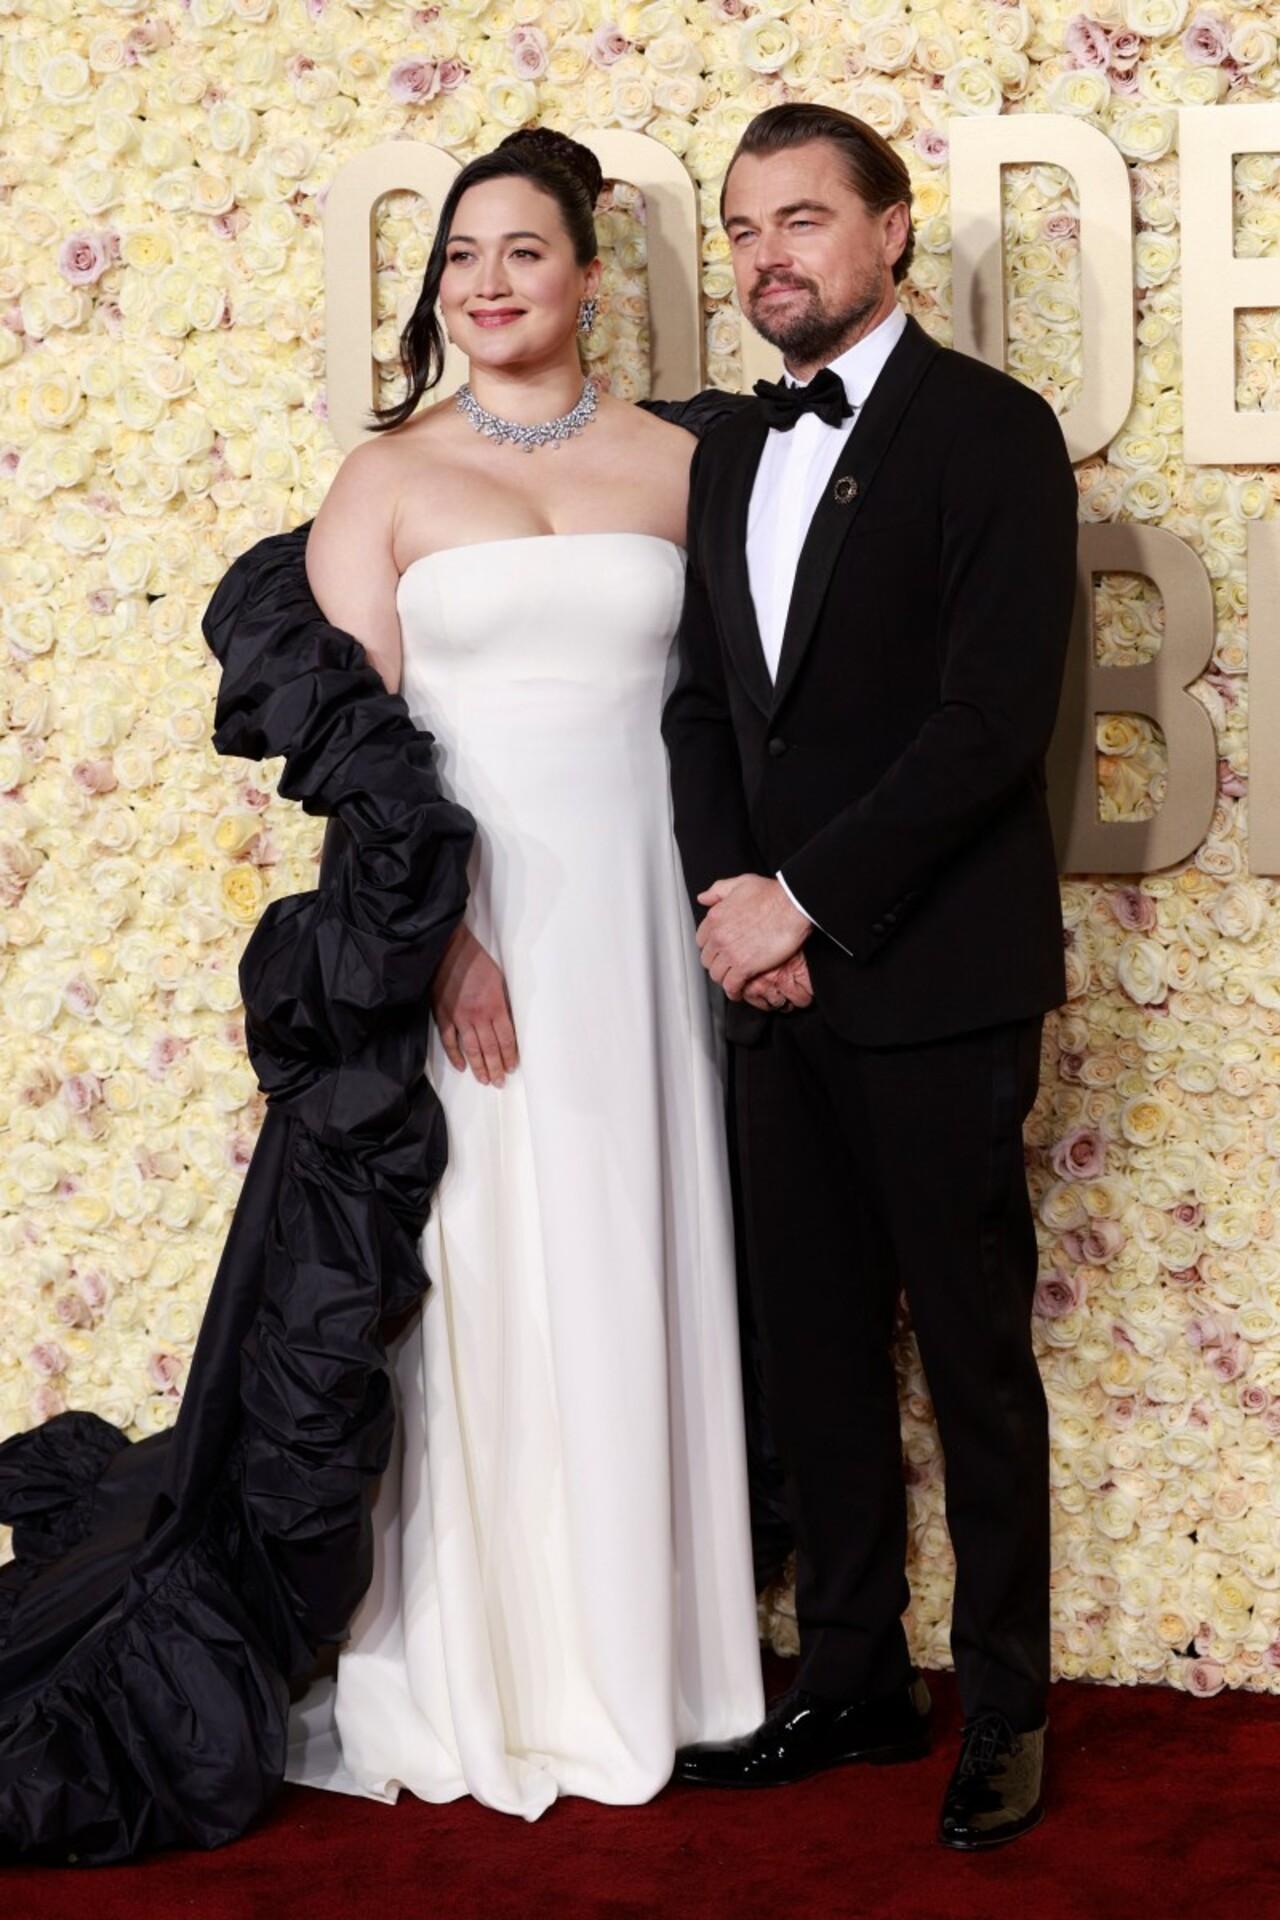 'Killer Of The Flower Moon' co-stars Lily Gladstone and Leonardo DiCaprio struck poses on the red carpet in coordinated outfits